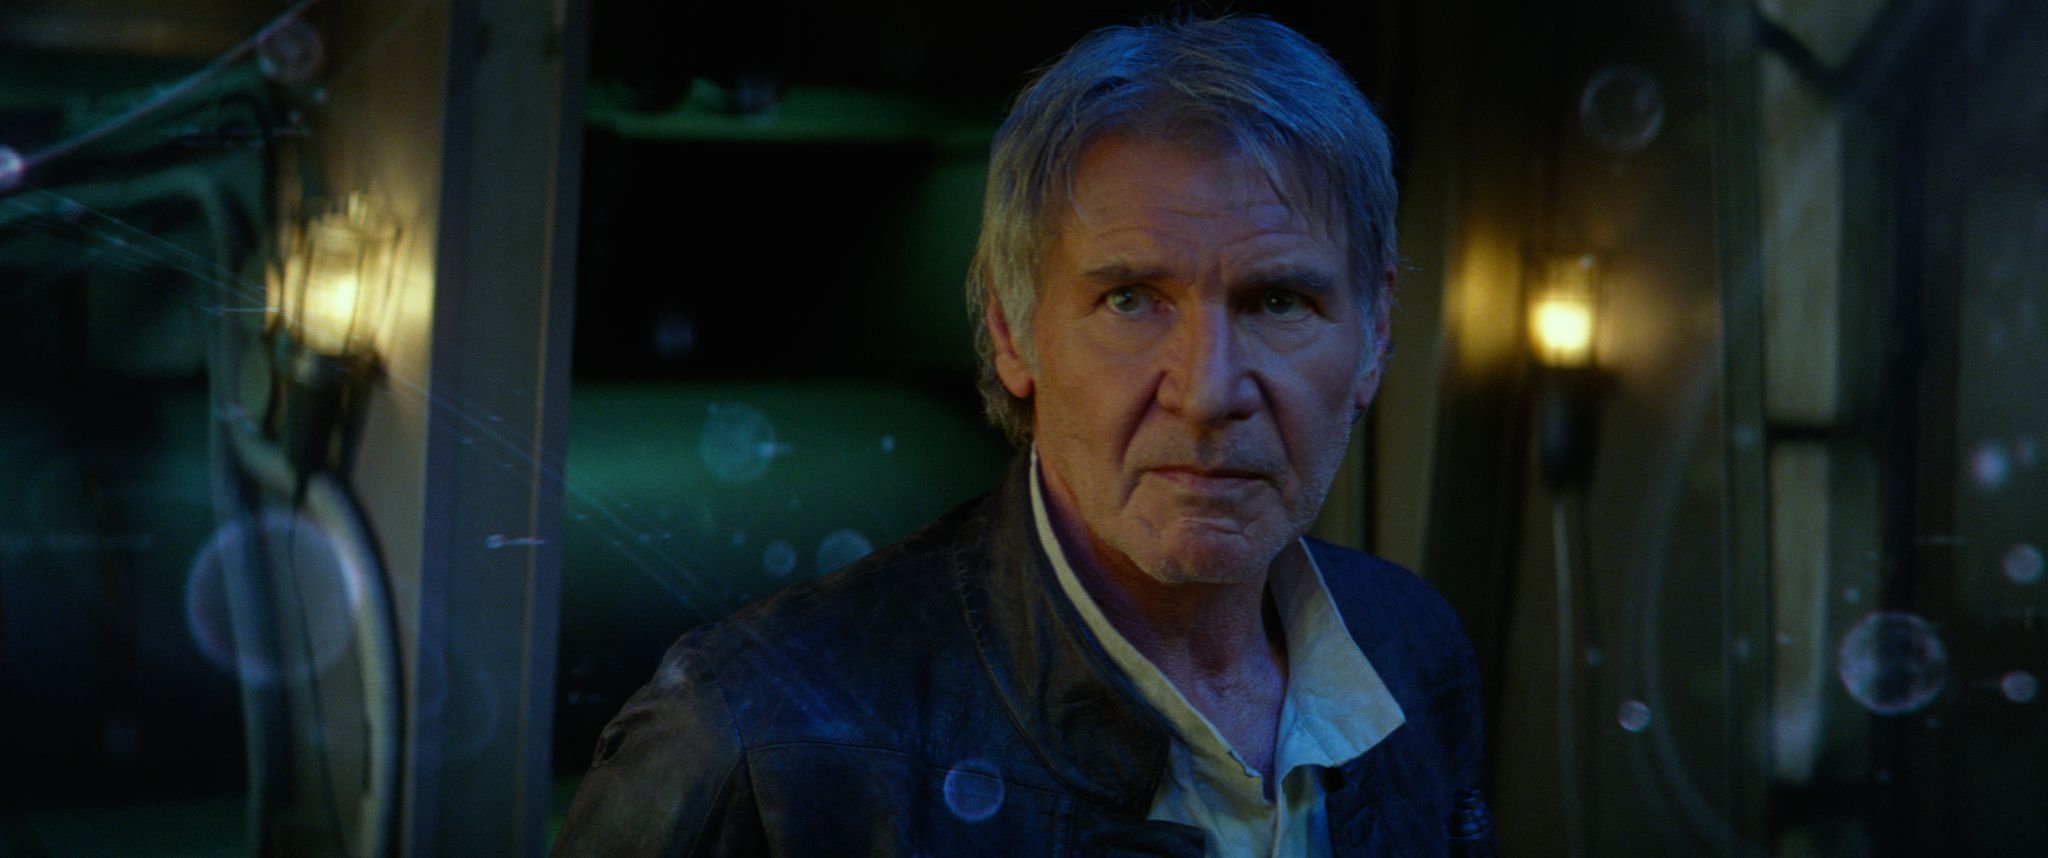 Harrison Ford as Han Solo in "Star Wars: The Force Awakens." (Lucasfilm/Disney)